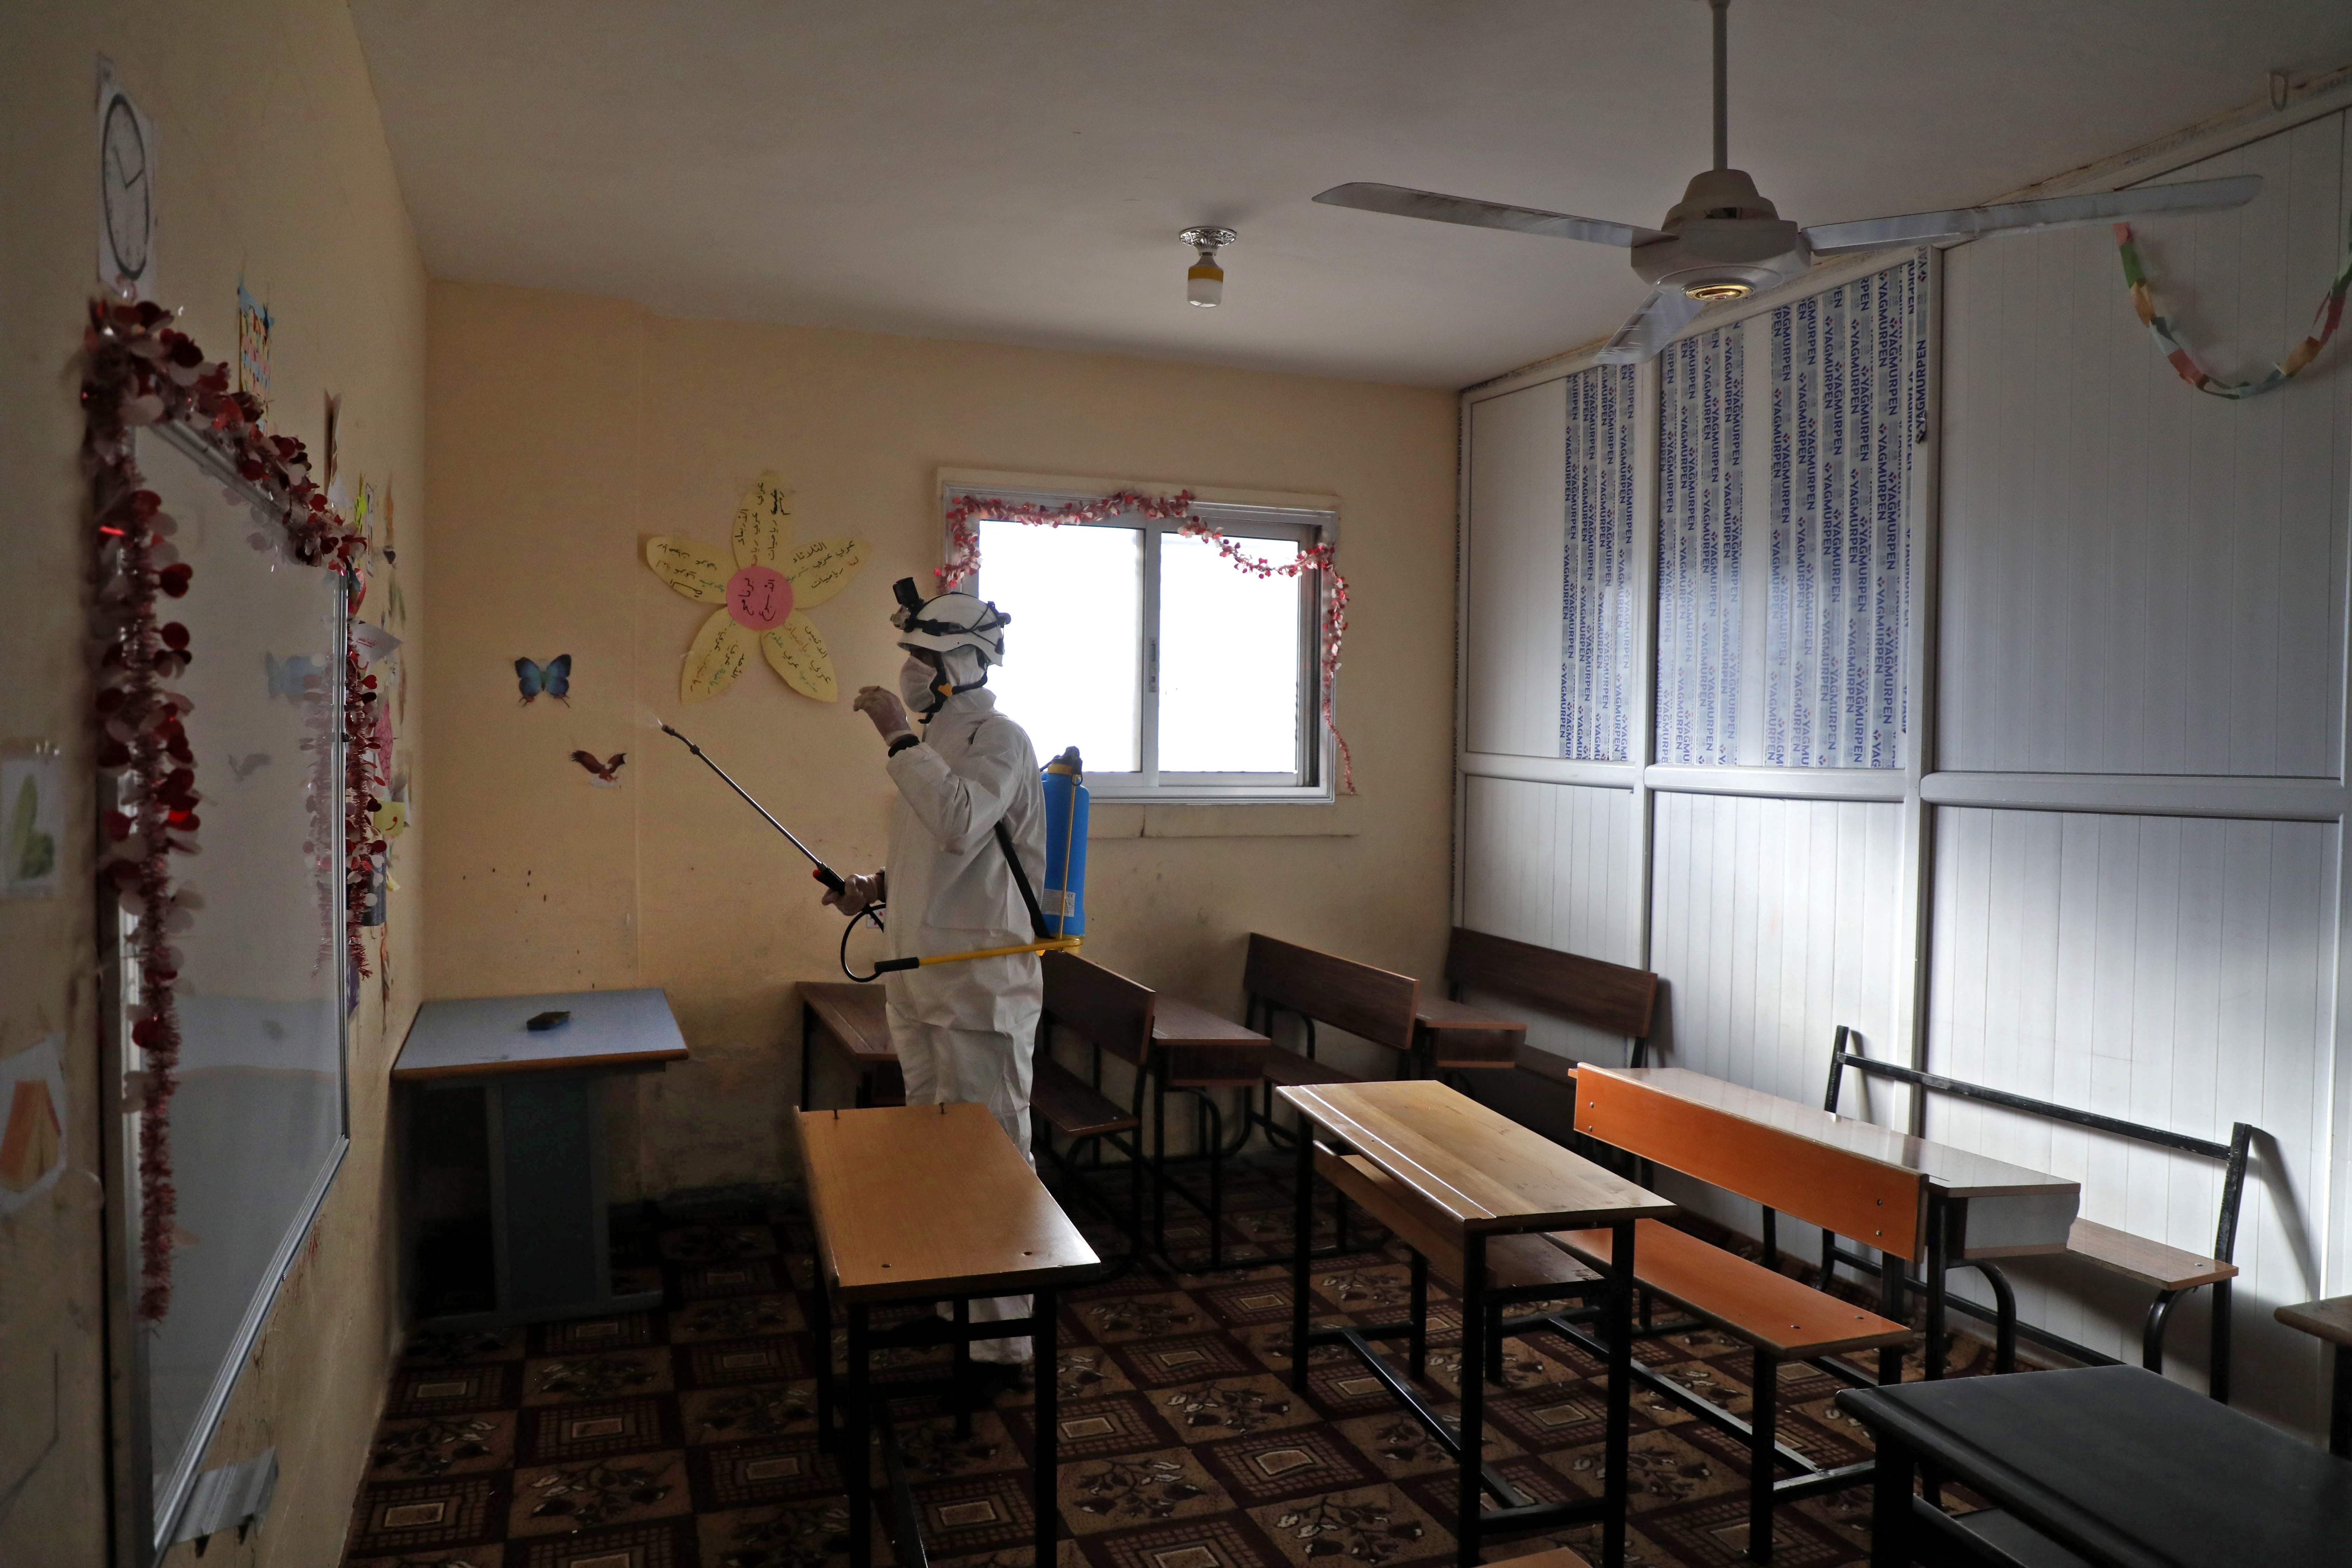 A member of the Syrian Civil Defence known as the 'White Helmets' disinfects a classroom, as part of preventive measures taken against infections by the novel coronavirus, in the Syrian town of Dana, east of the Turkish-Syrian border in the northwestern Idlib province,  Sunday, March 22, 2020.  (AFP)